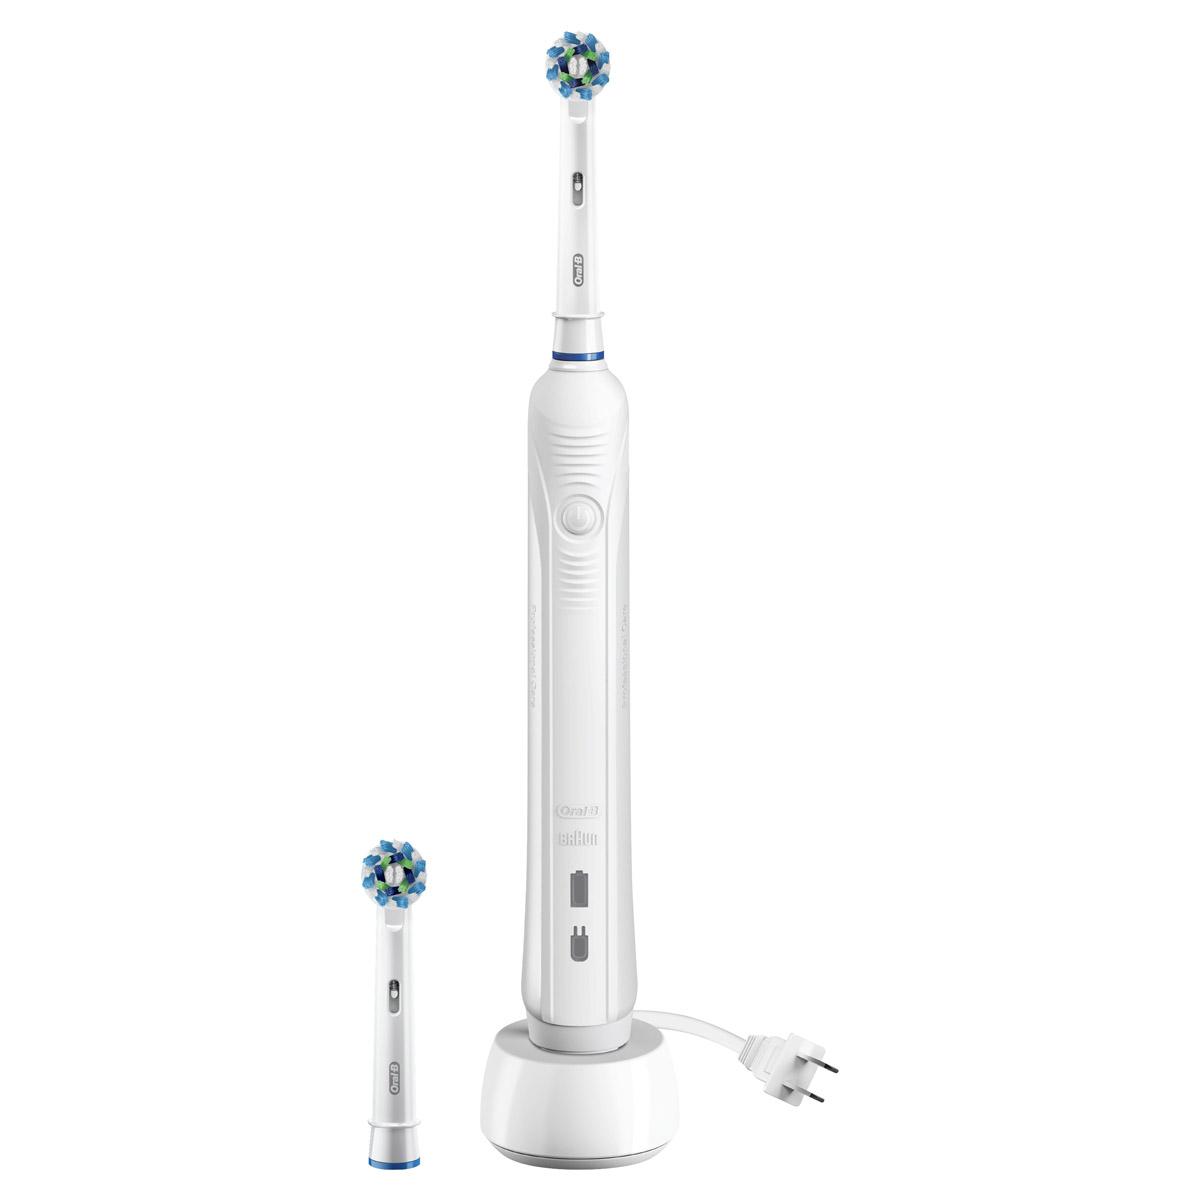 Oral-B Pro 1000 CrossAction Electric Toothbrush for $29.96